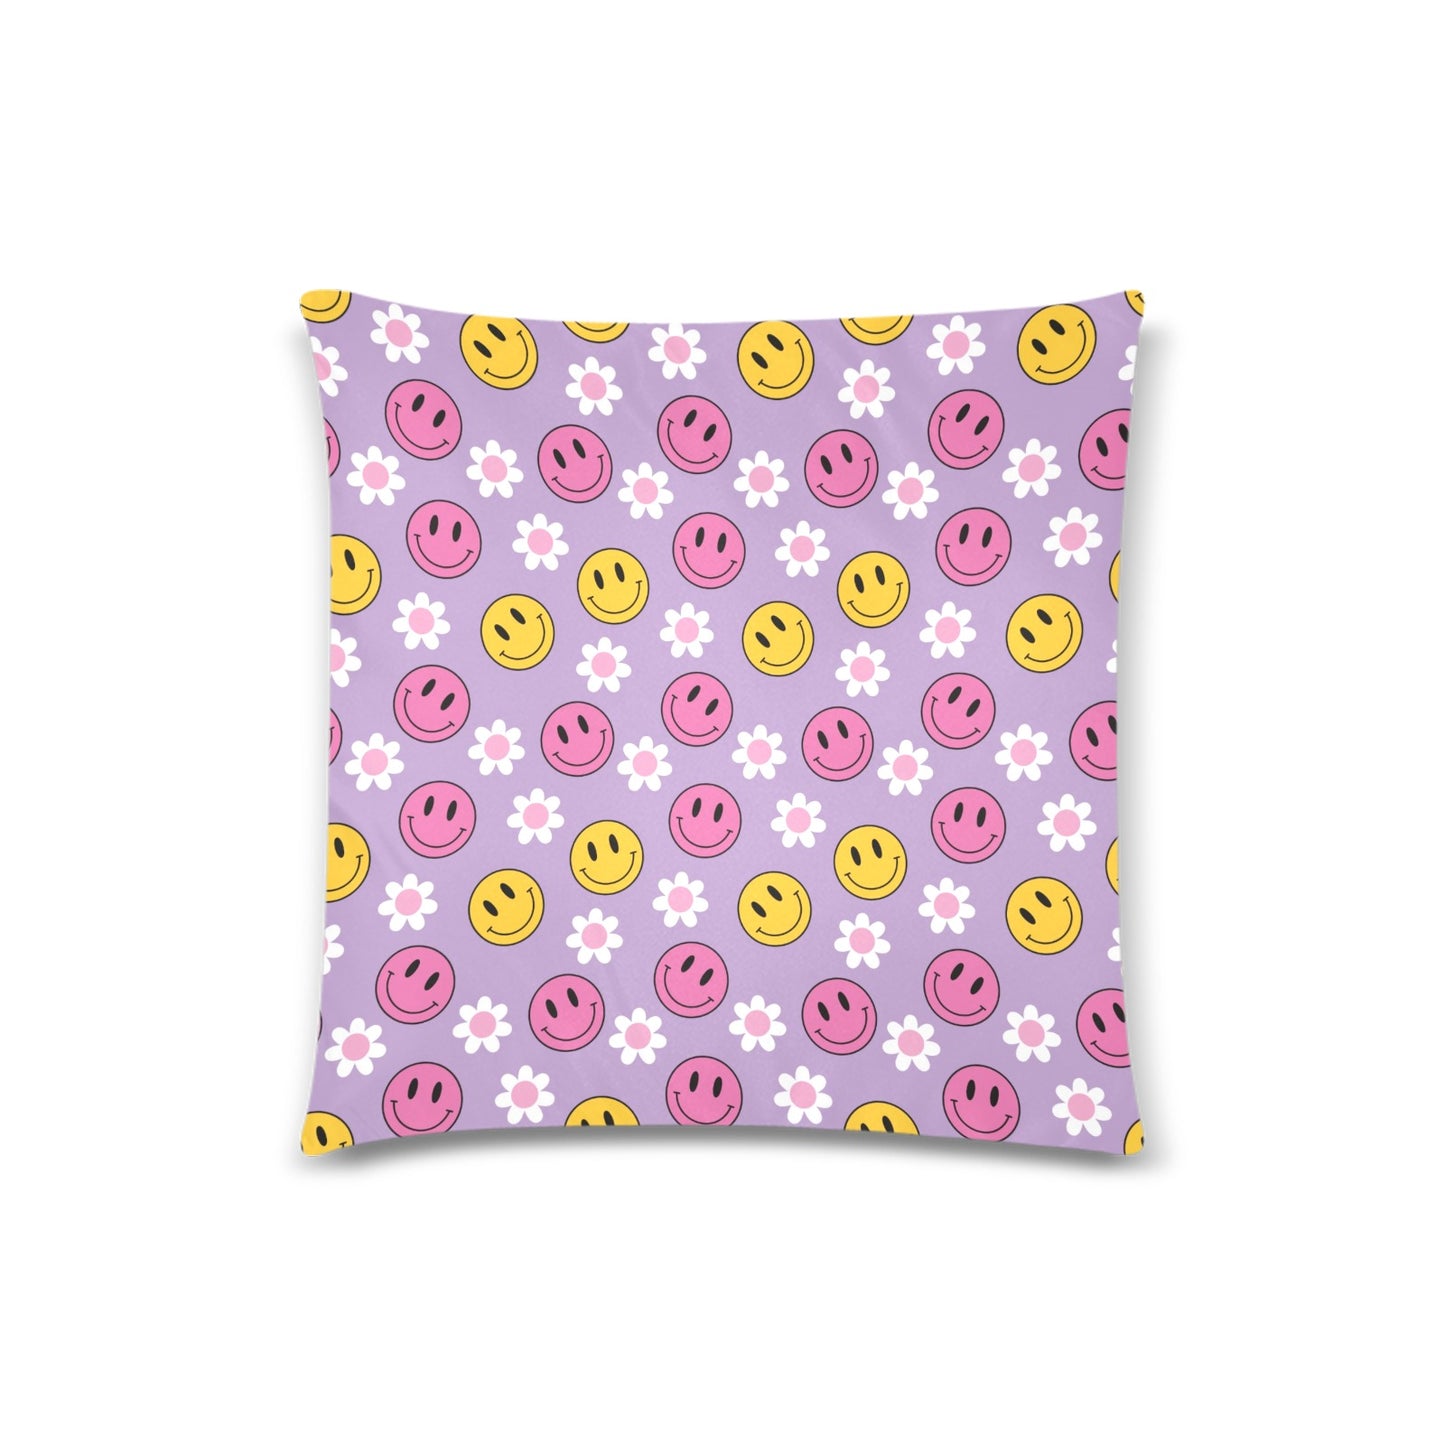 Smileys and Flowers Throw Pillow Cover